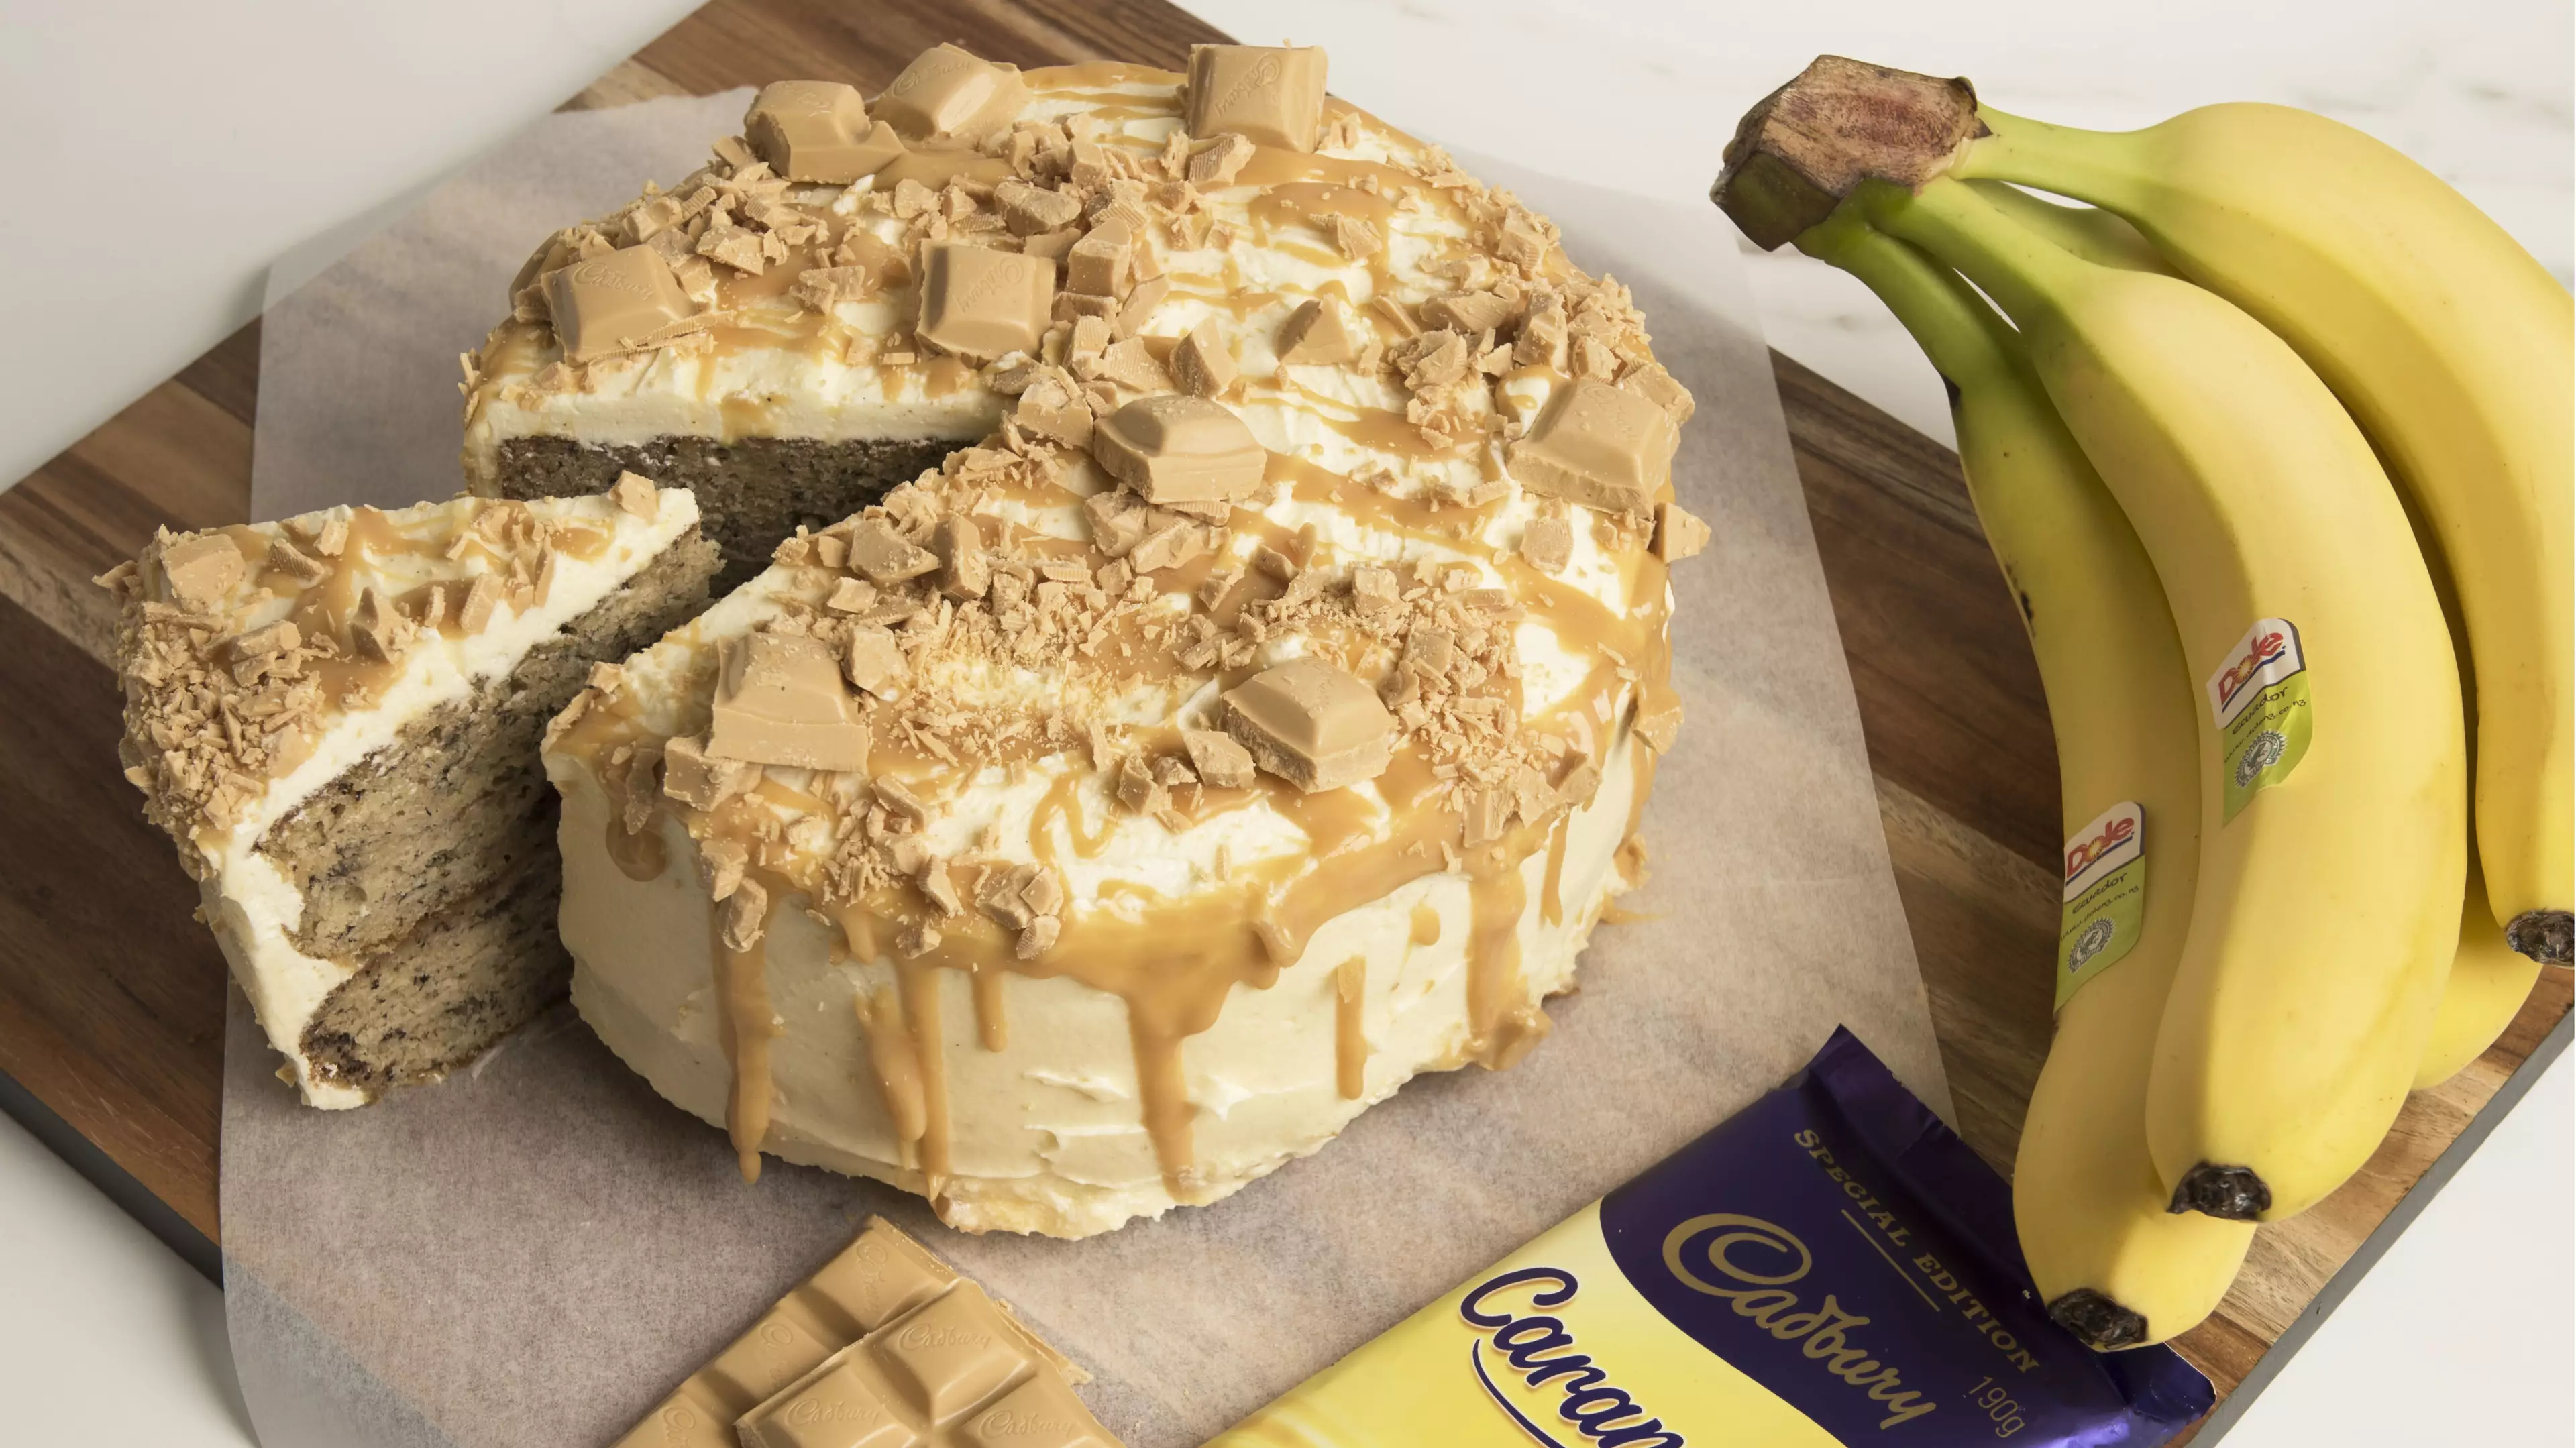 People Are Going Wild For This Caramilk Banana Bread Cake Recipe